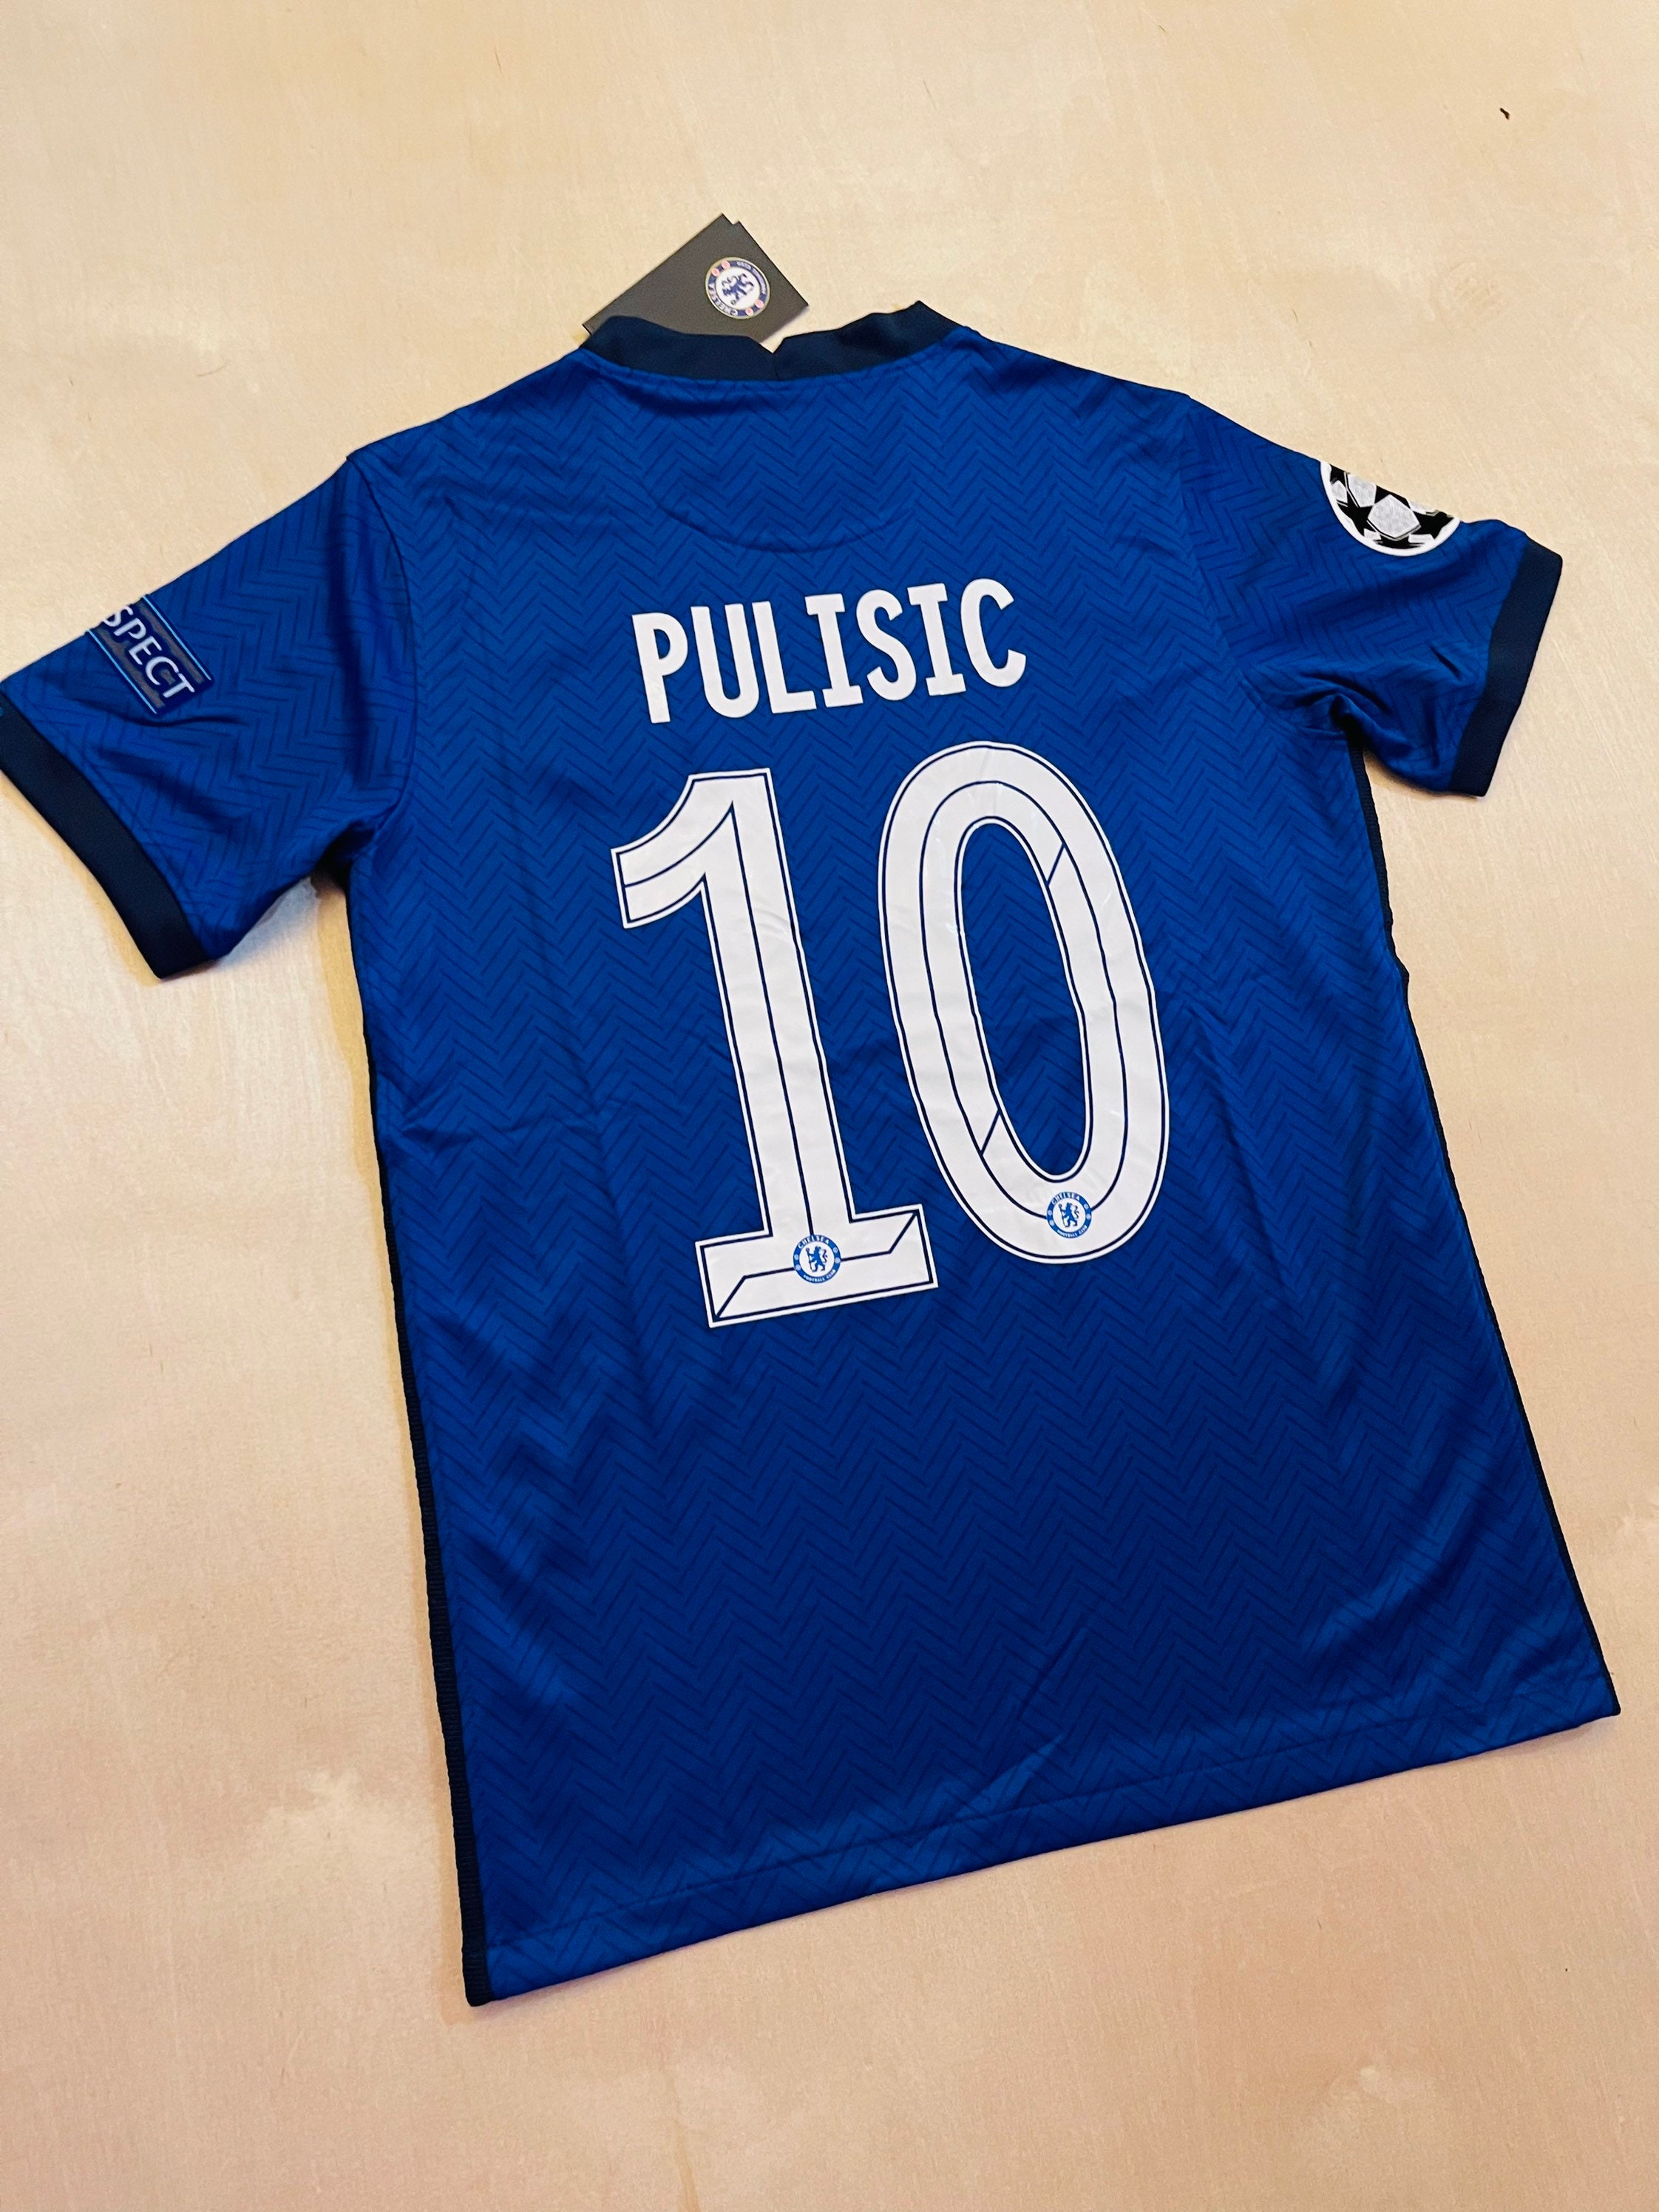 Pulisic 10 Chelsea Home soccer jersey Champions league final | Etsy